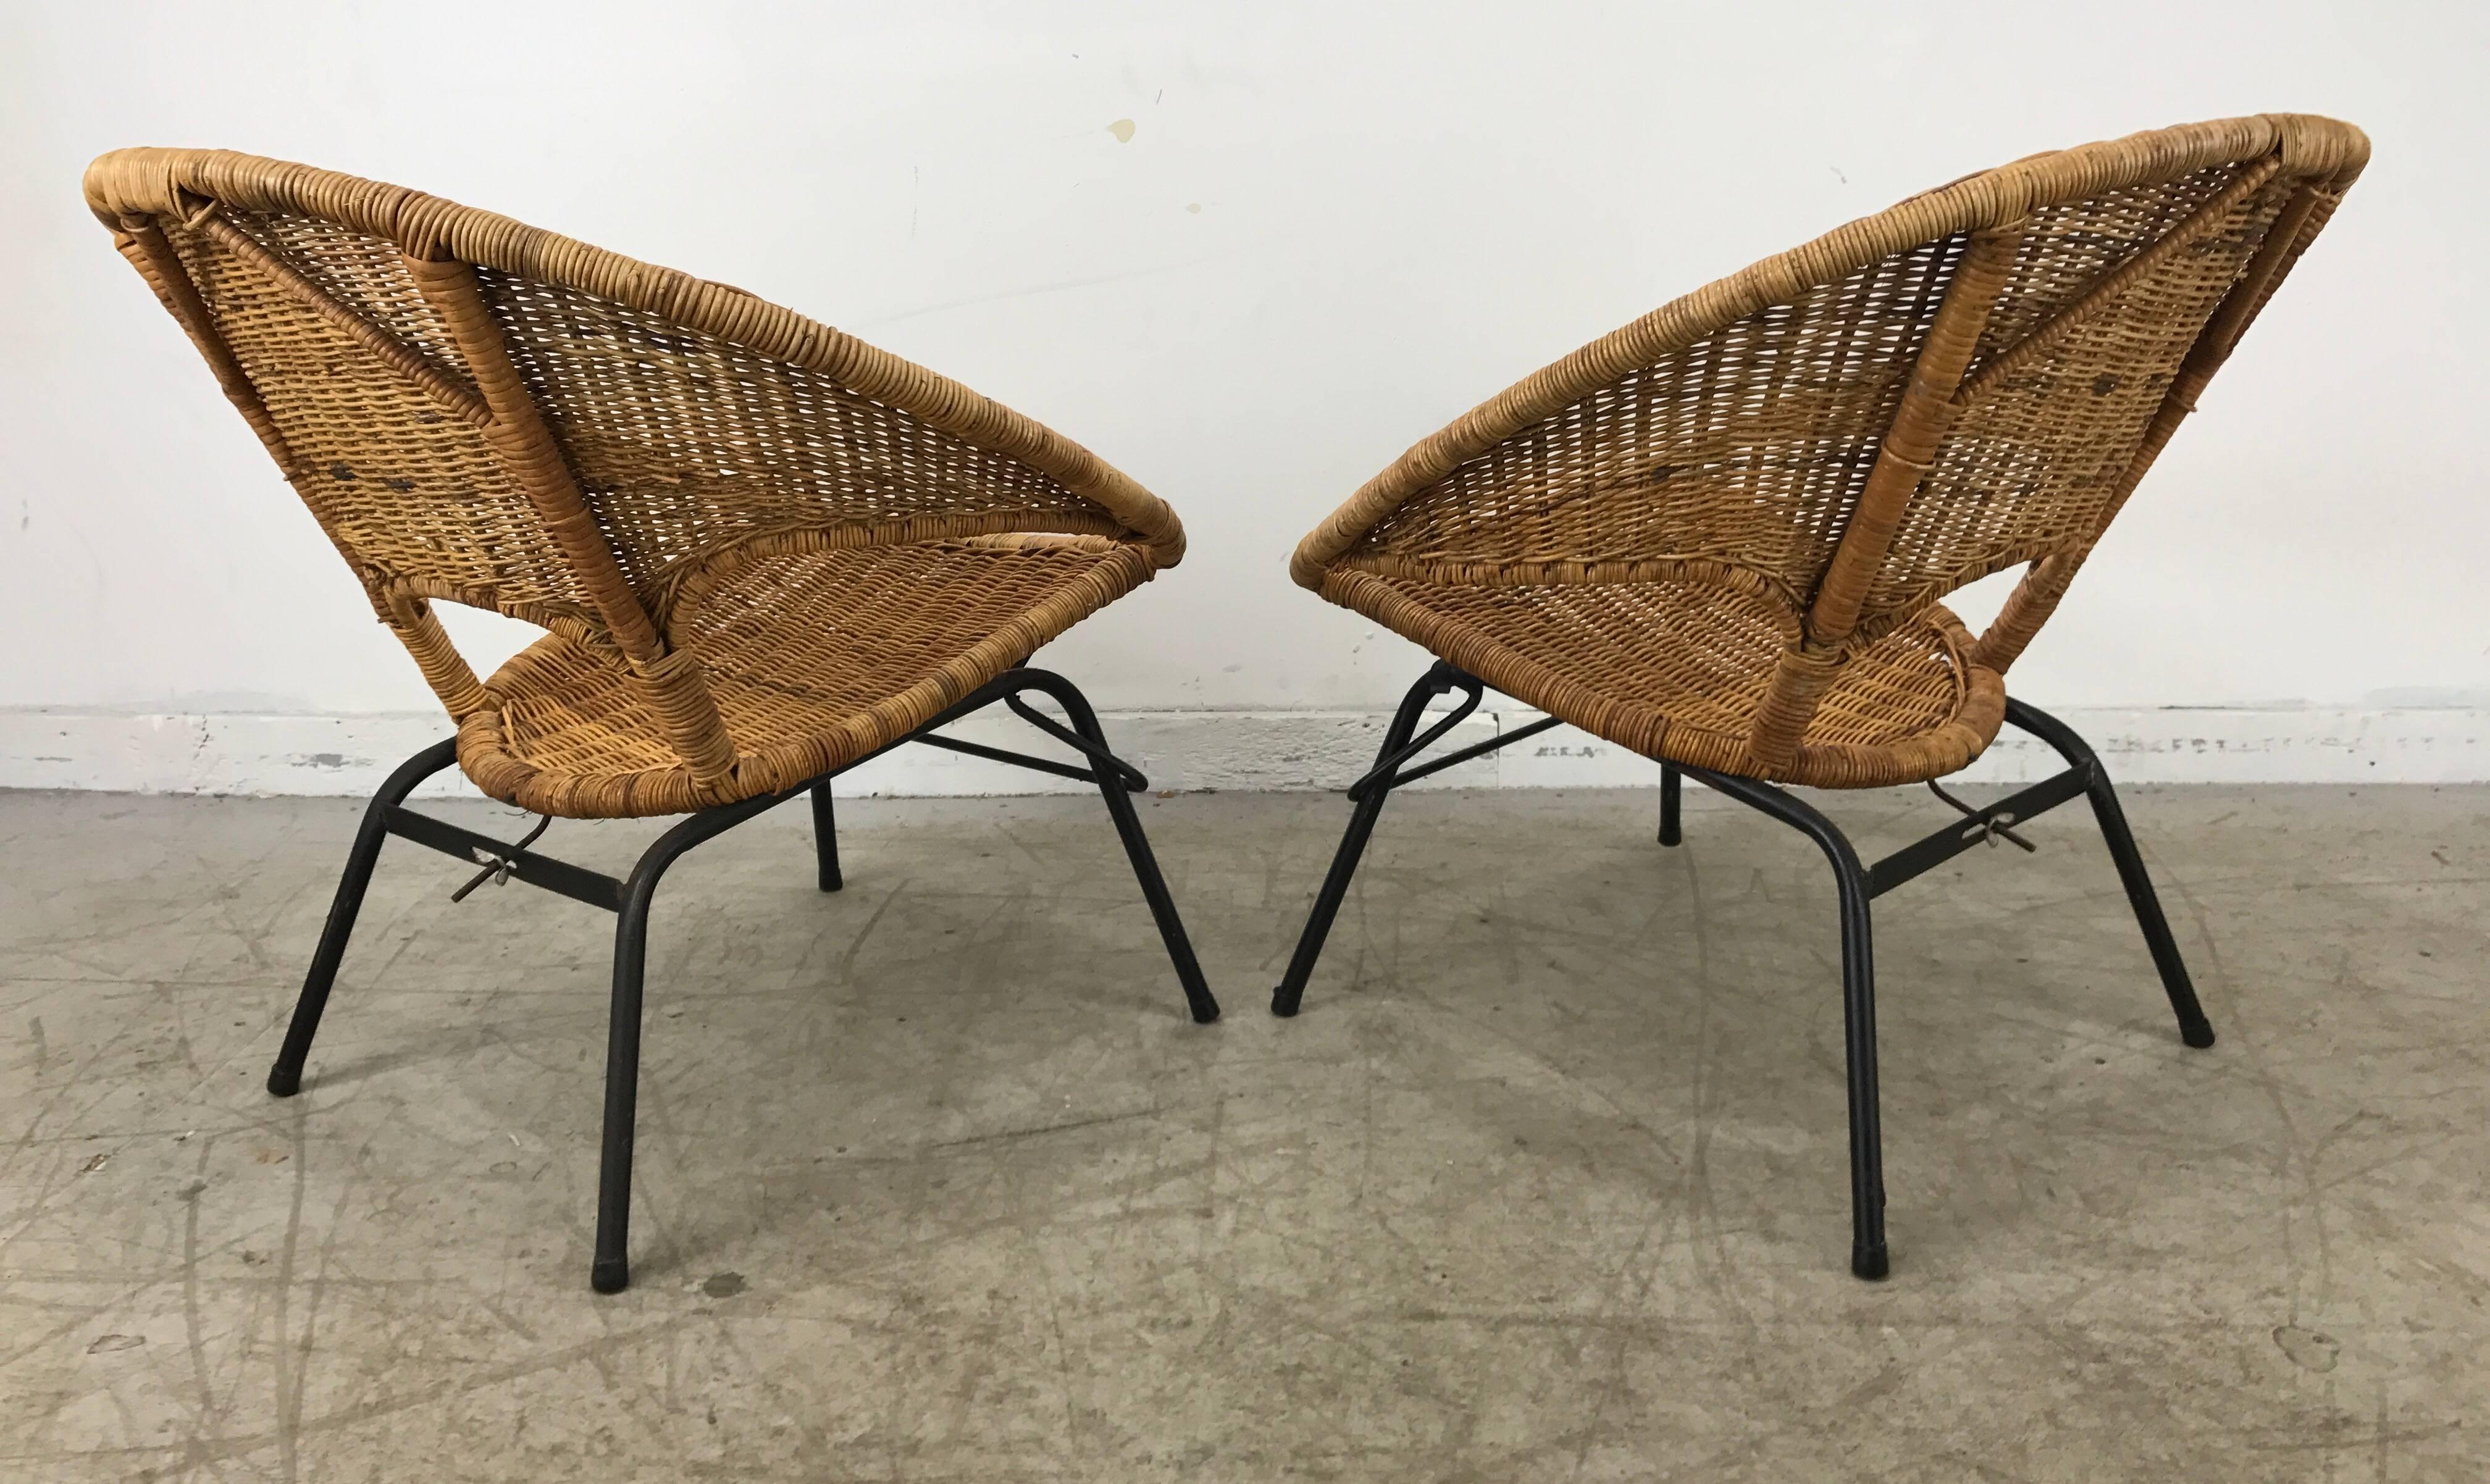 20th Century Modernist Wicker and Iron Hoop Chairs by Franco Albini